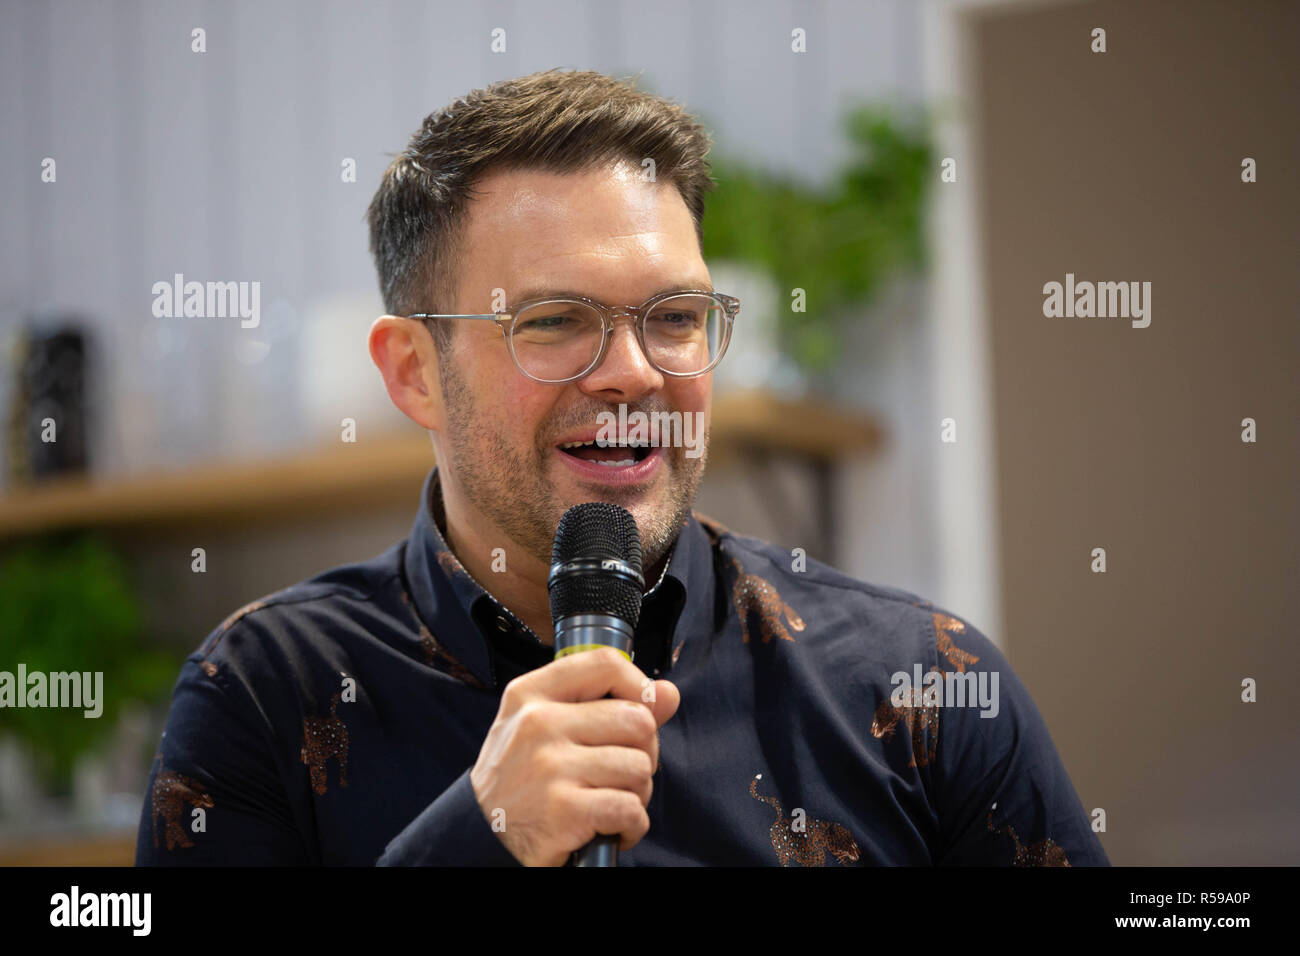 Birmingham, UK. 30th Nov, 2018. 2018 Masterchef champion Kenny Tutt chatting about what he has been up to after winning the show and his future plans Credit: steven roe/Alamy Live News Stock Photo